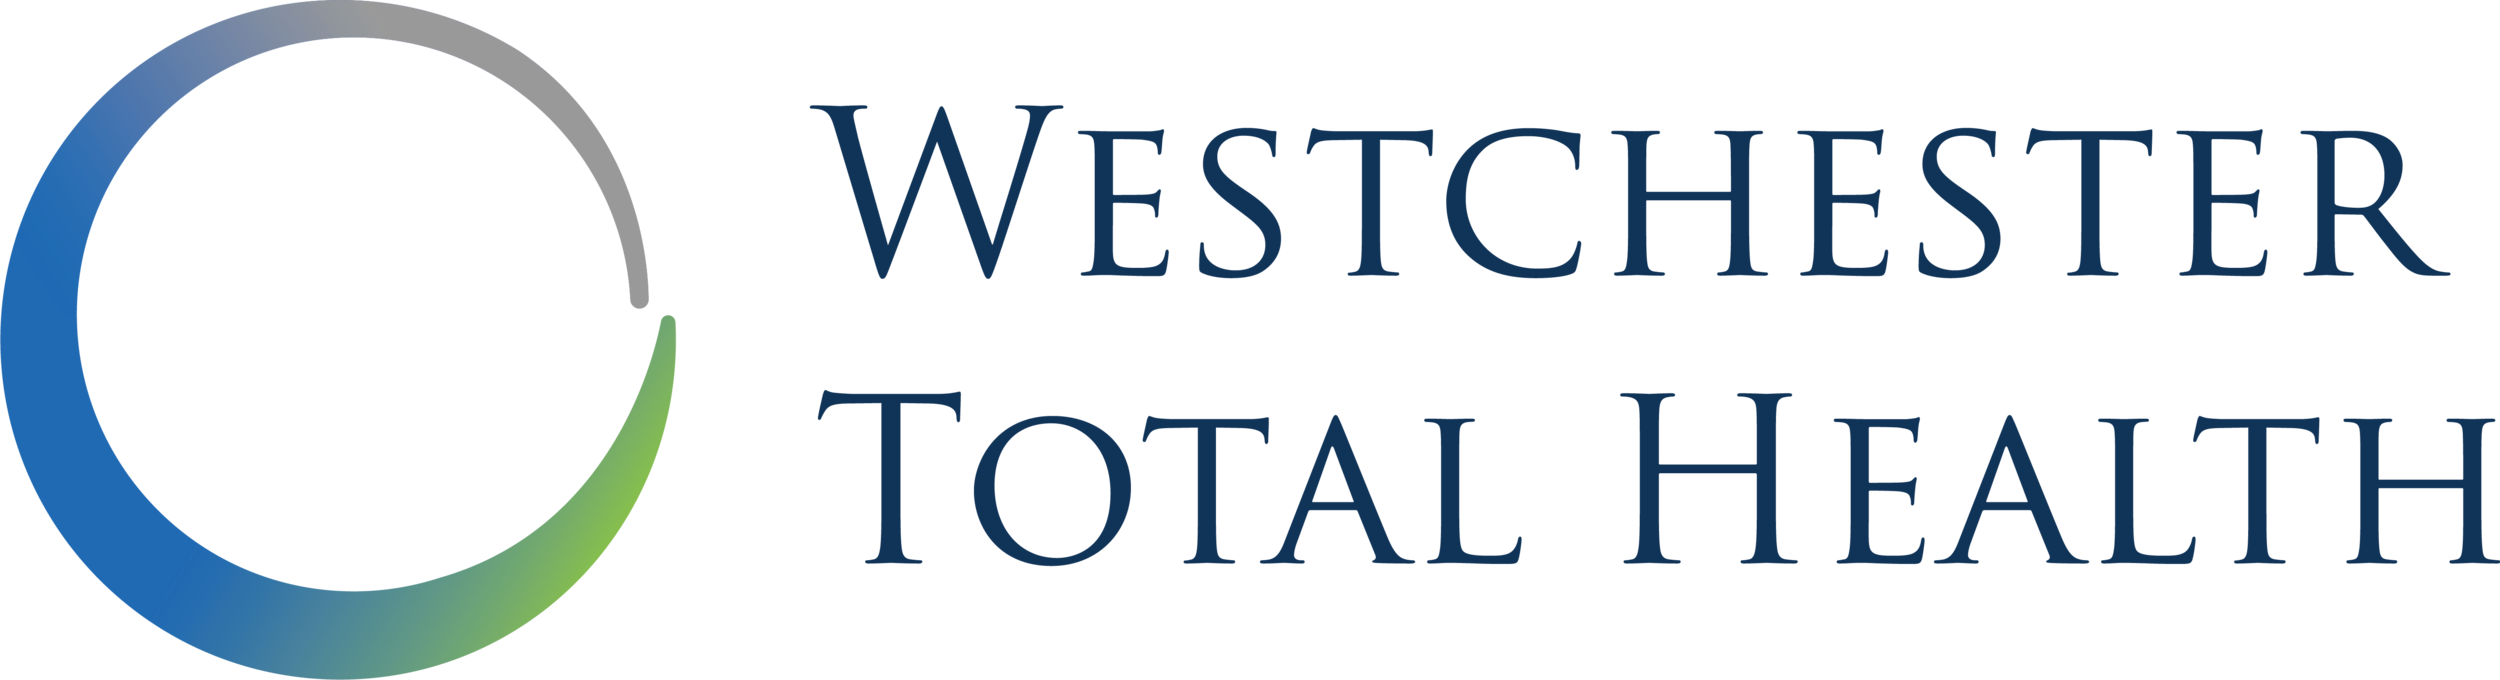 Westchester Total Health